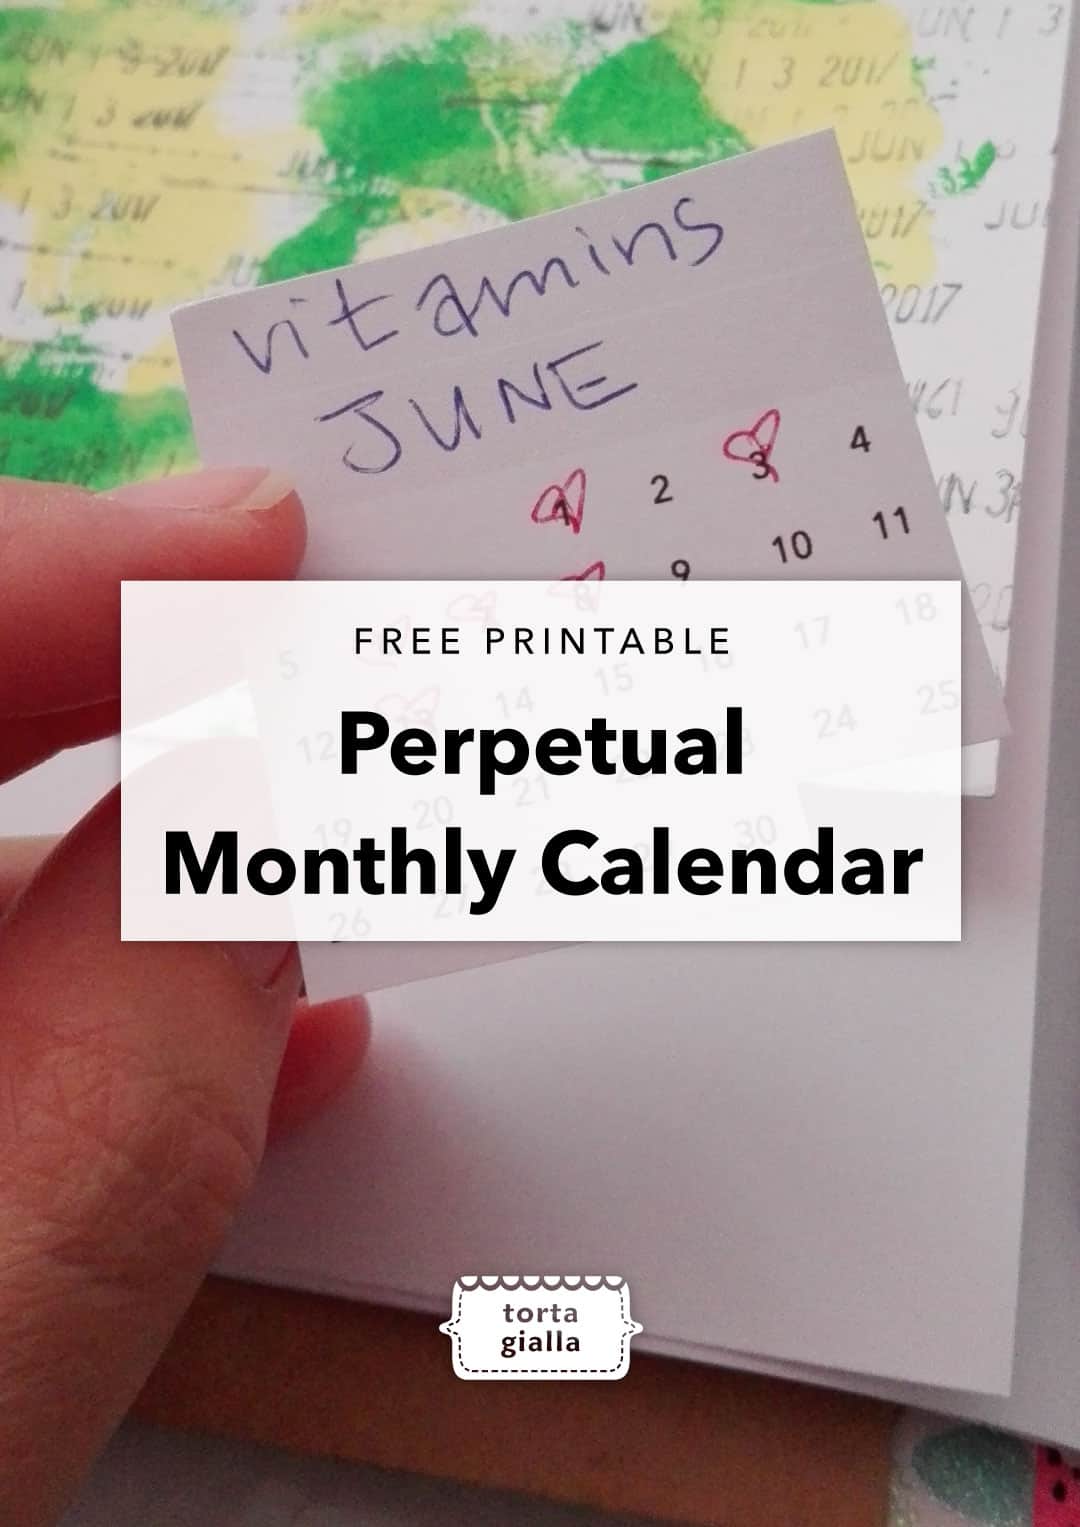 Free perpetual monthly calendar printable - cut out any month for checklists, tracking and planner/journal inserts